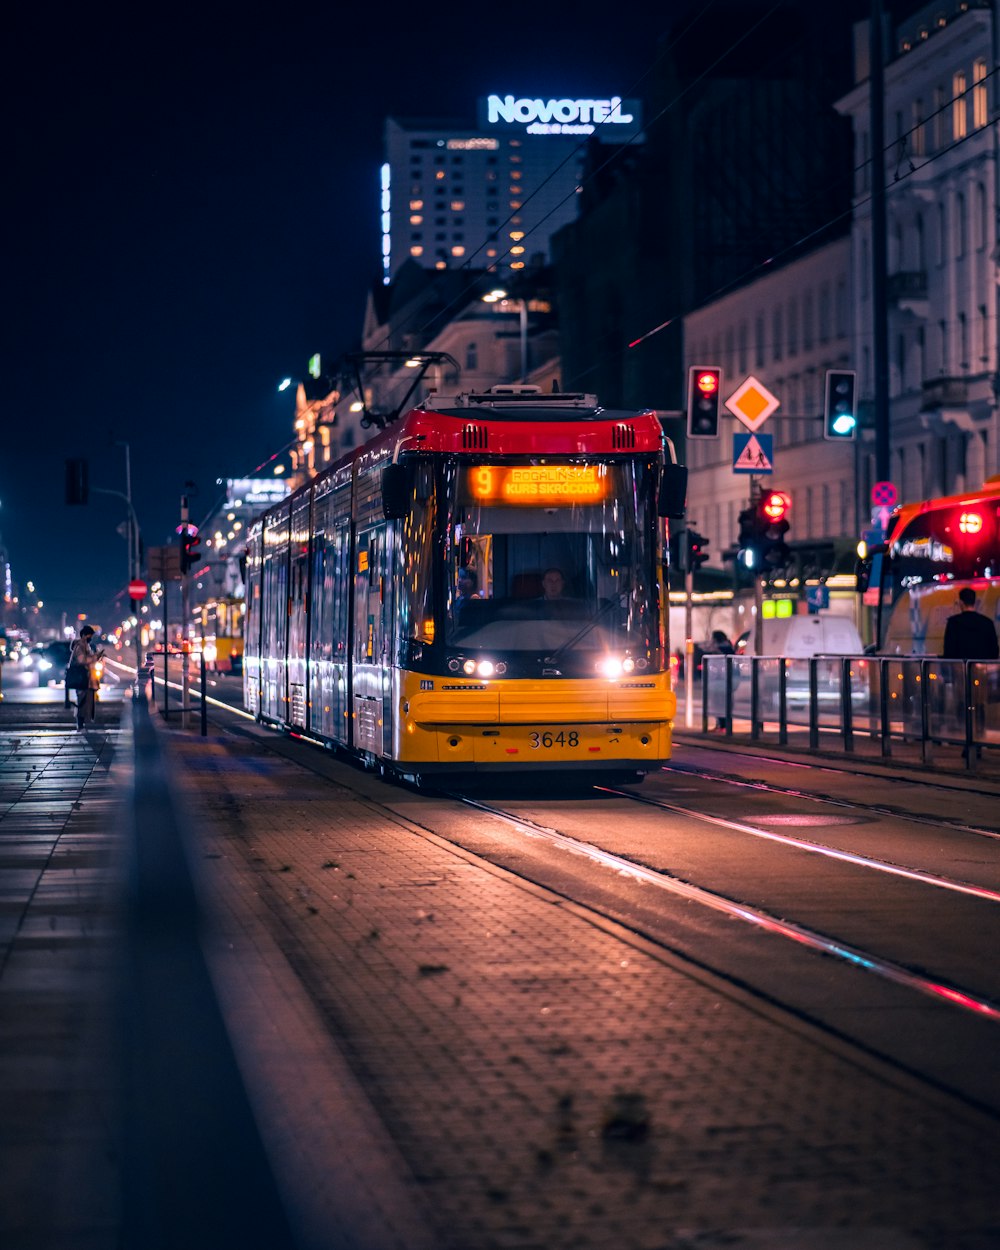 a city street at night with a trolley on the tracks